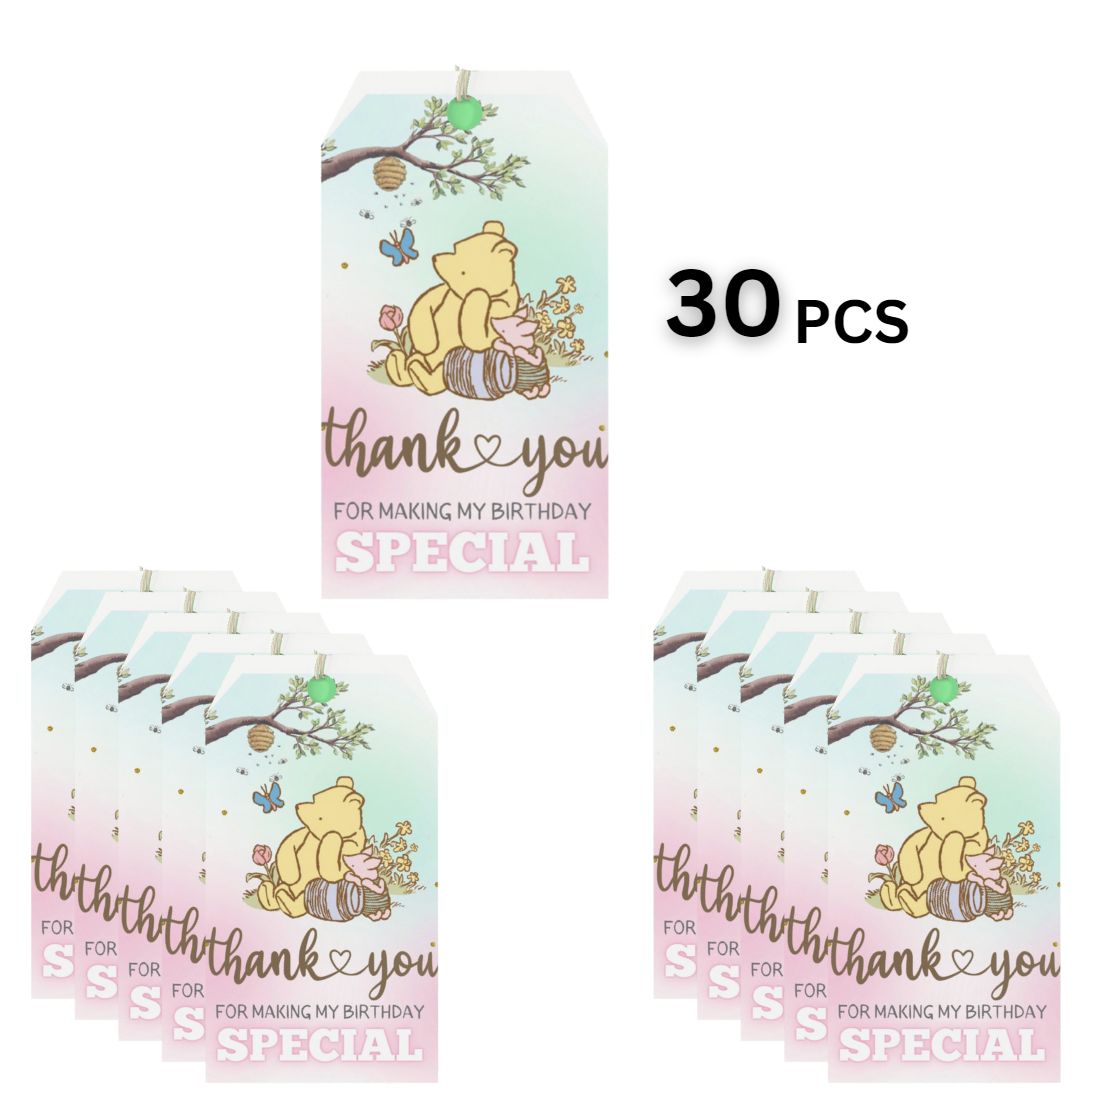 Winnie The Pooh Theme Model 2 Birthday Favour Tags (2 x 3.5 inches/250 GSM Cardstock/Green, Brown, Light blue, White & Pink/30Pcs)